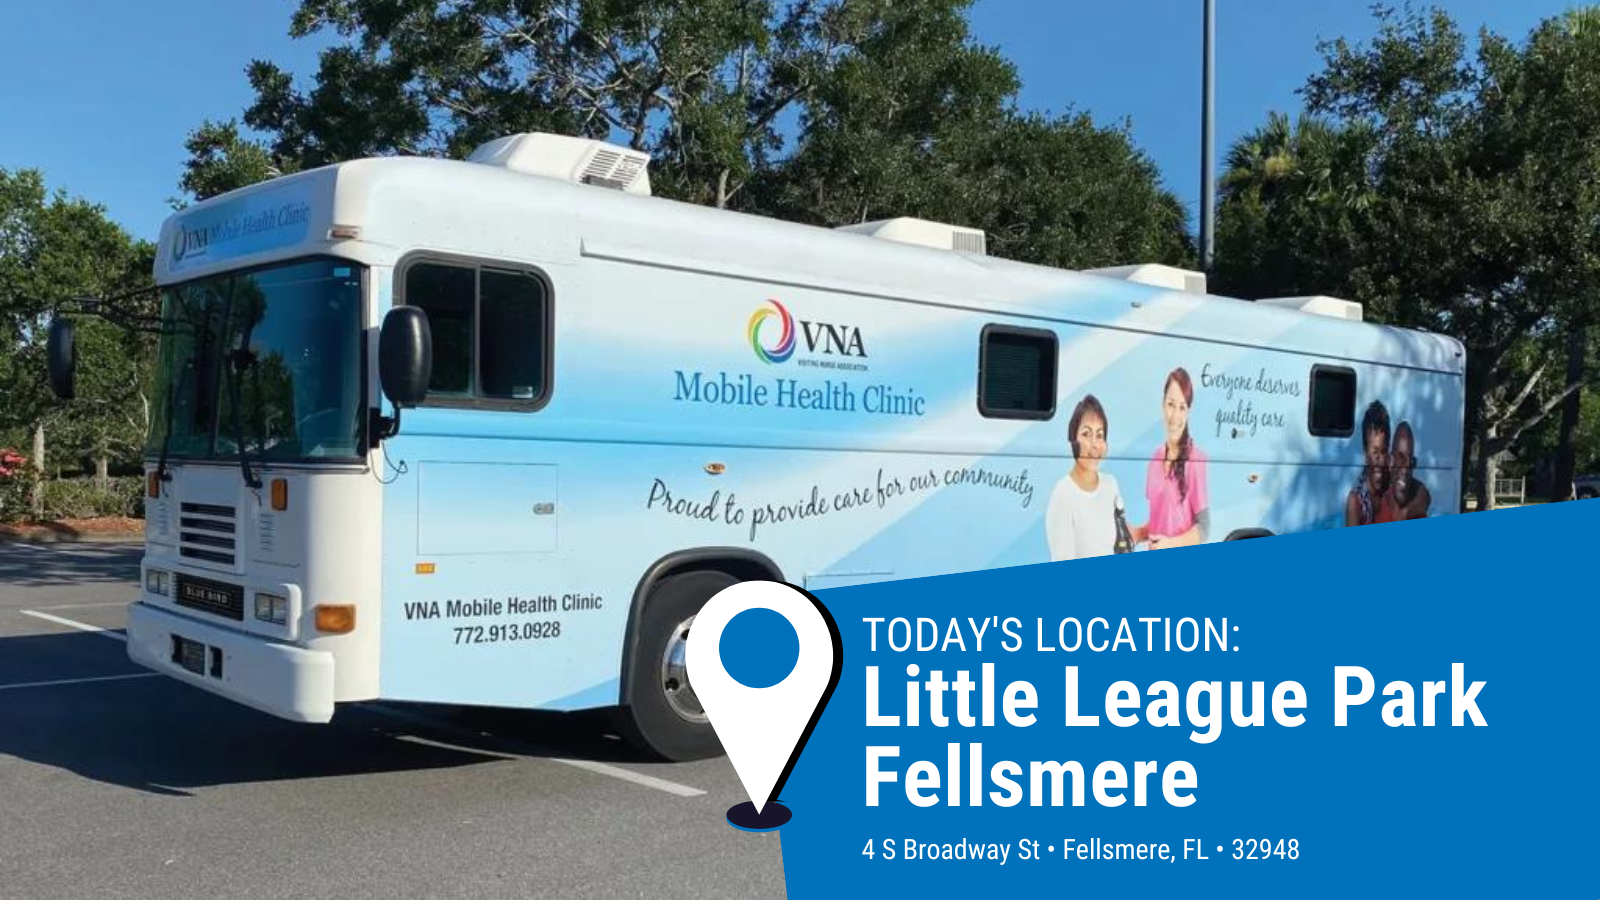 VRP Medical Center's New Mobile Health Clinic: Your Healthcare on